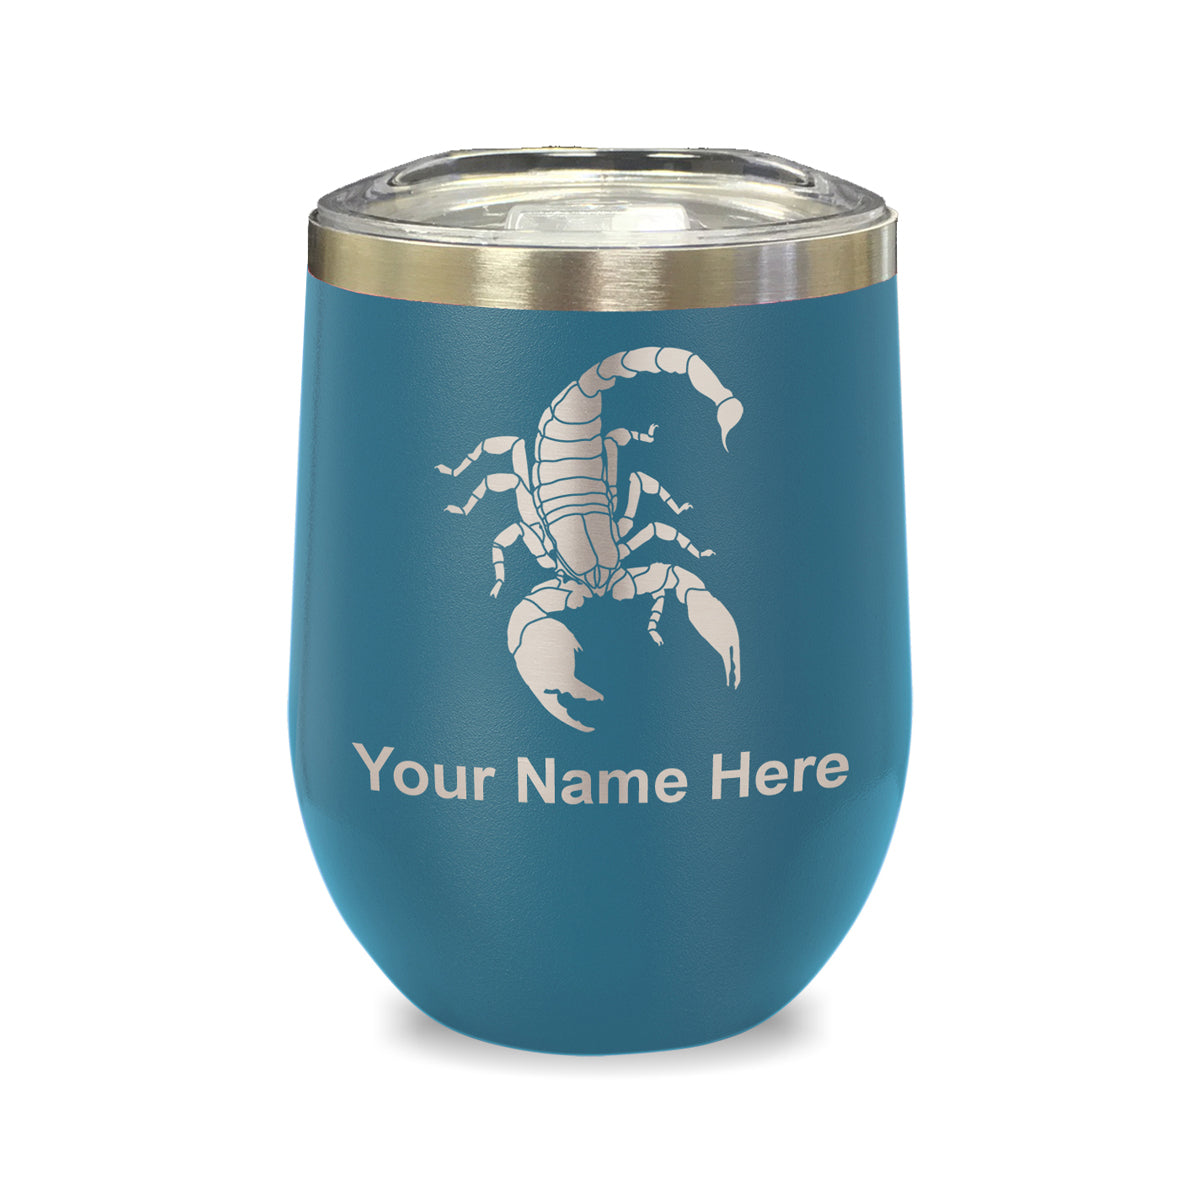 LaserGram Double Wall Stainless Steel Wine Glass, Scorpion, Personalized Engraving Included